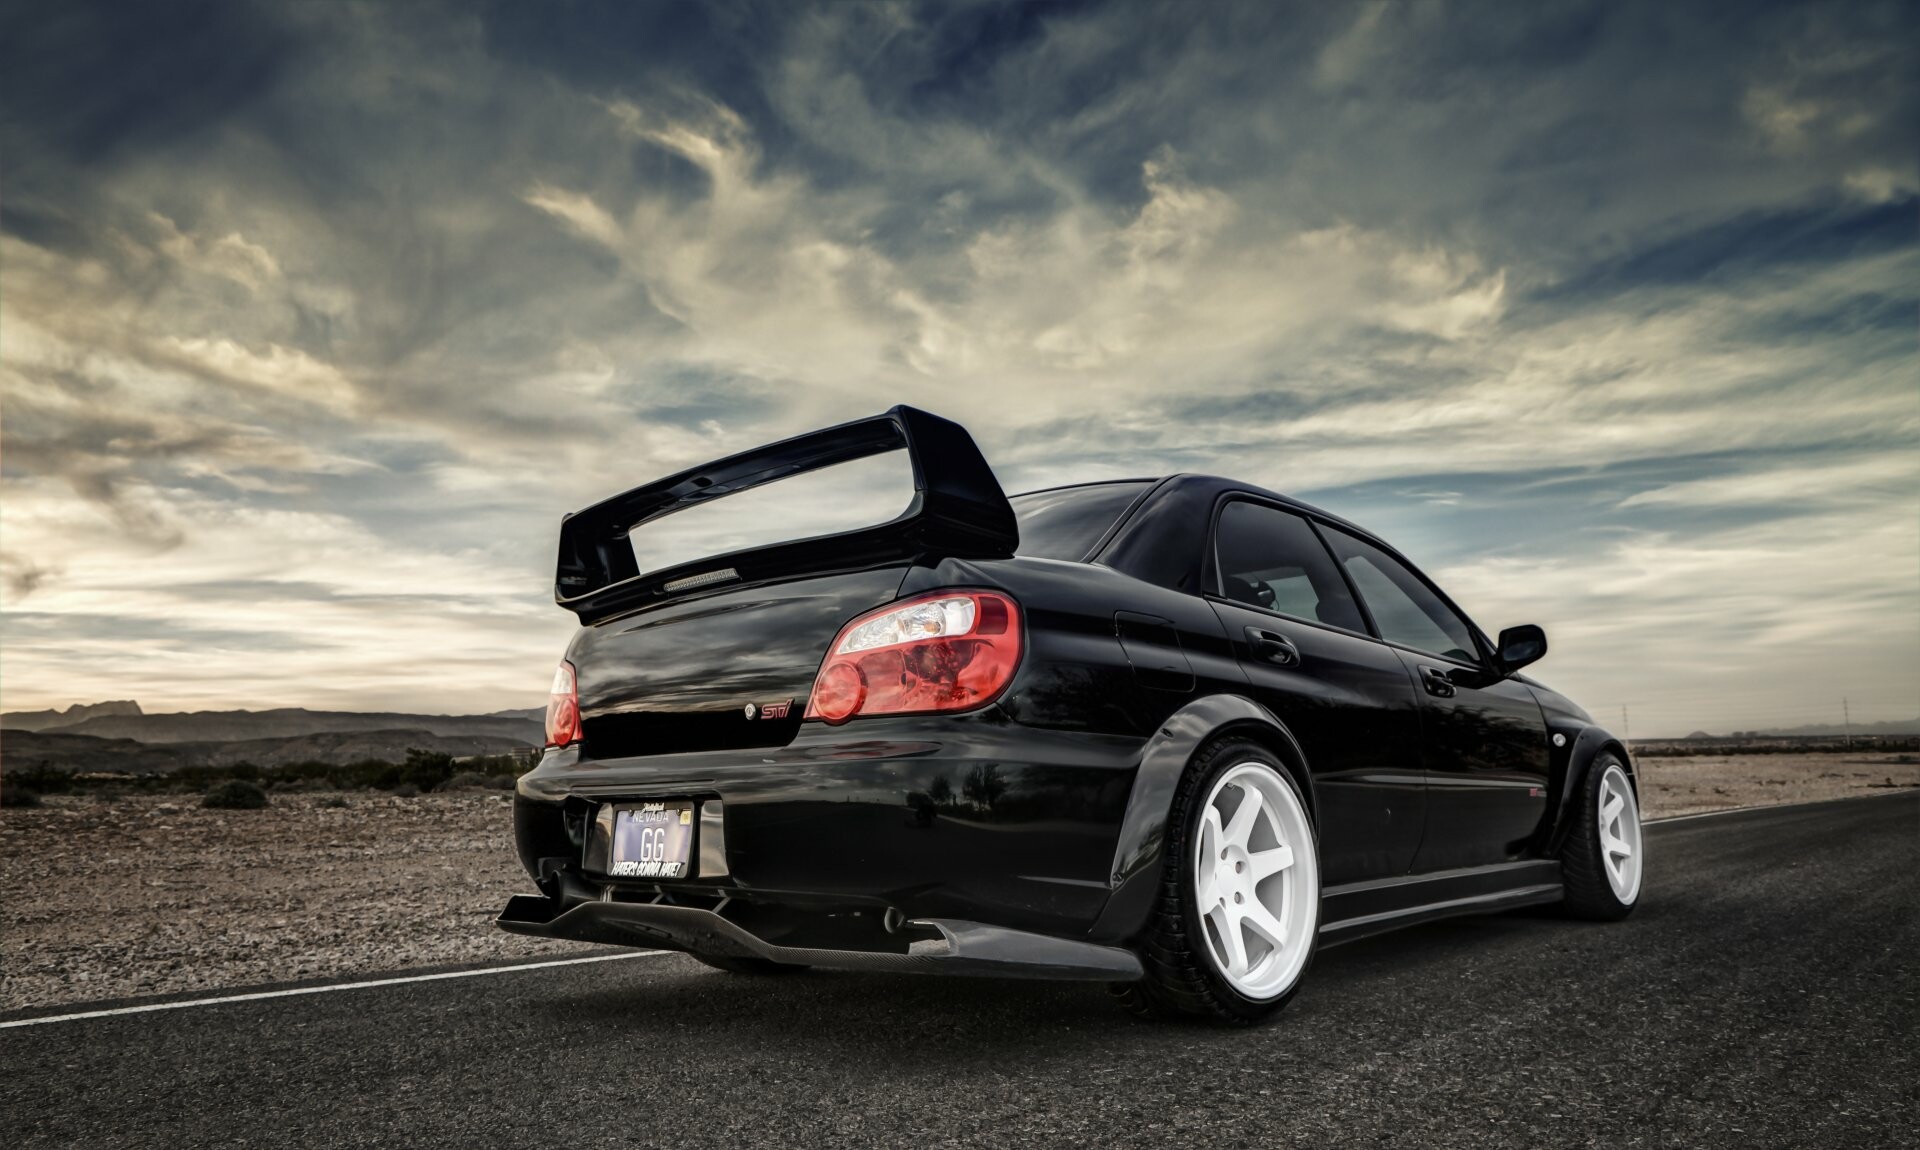 Subaru: The vehicles that are built on Subaru's unique always-on Symmetrical All-Wheel Drive system, SAWD. 1920x1150 HD Wallpaper.